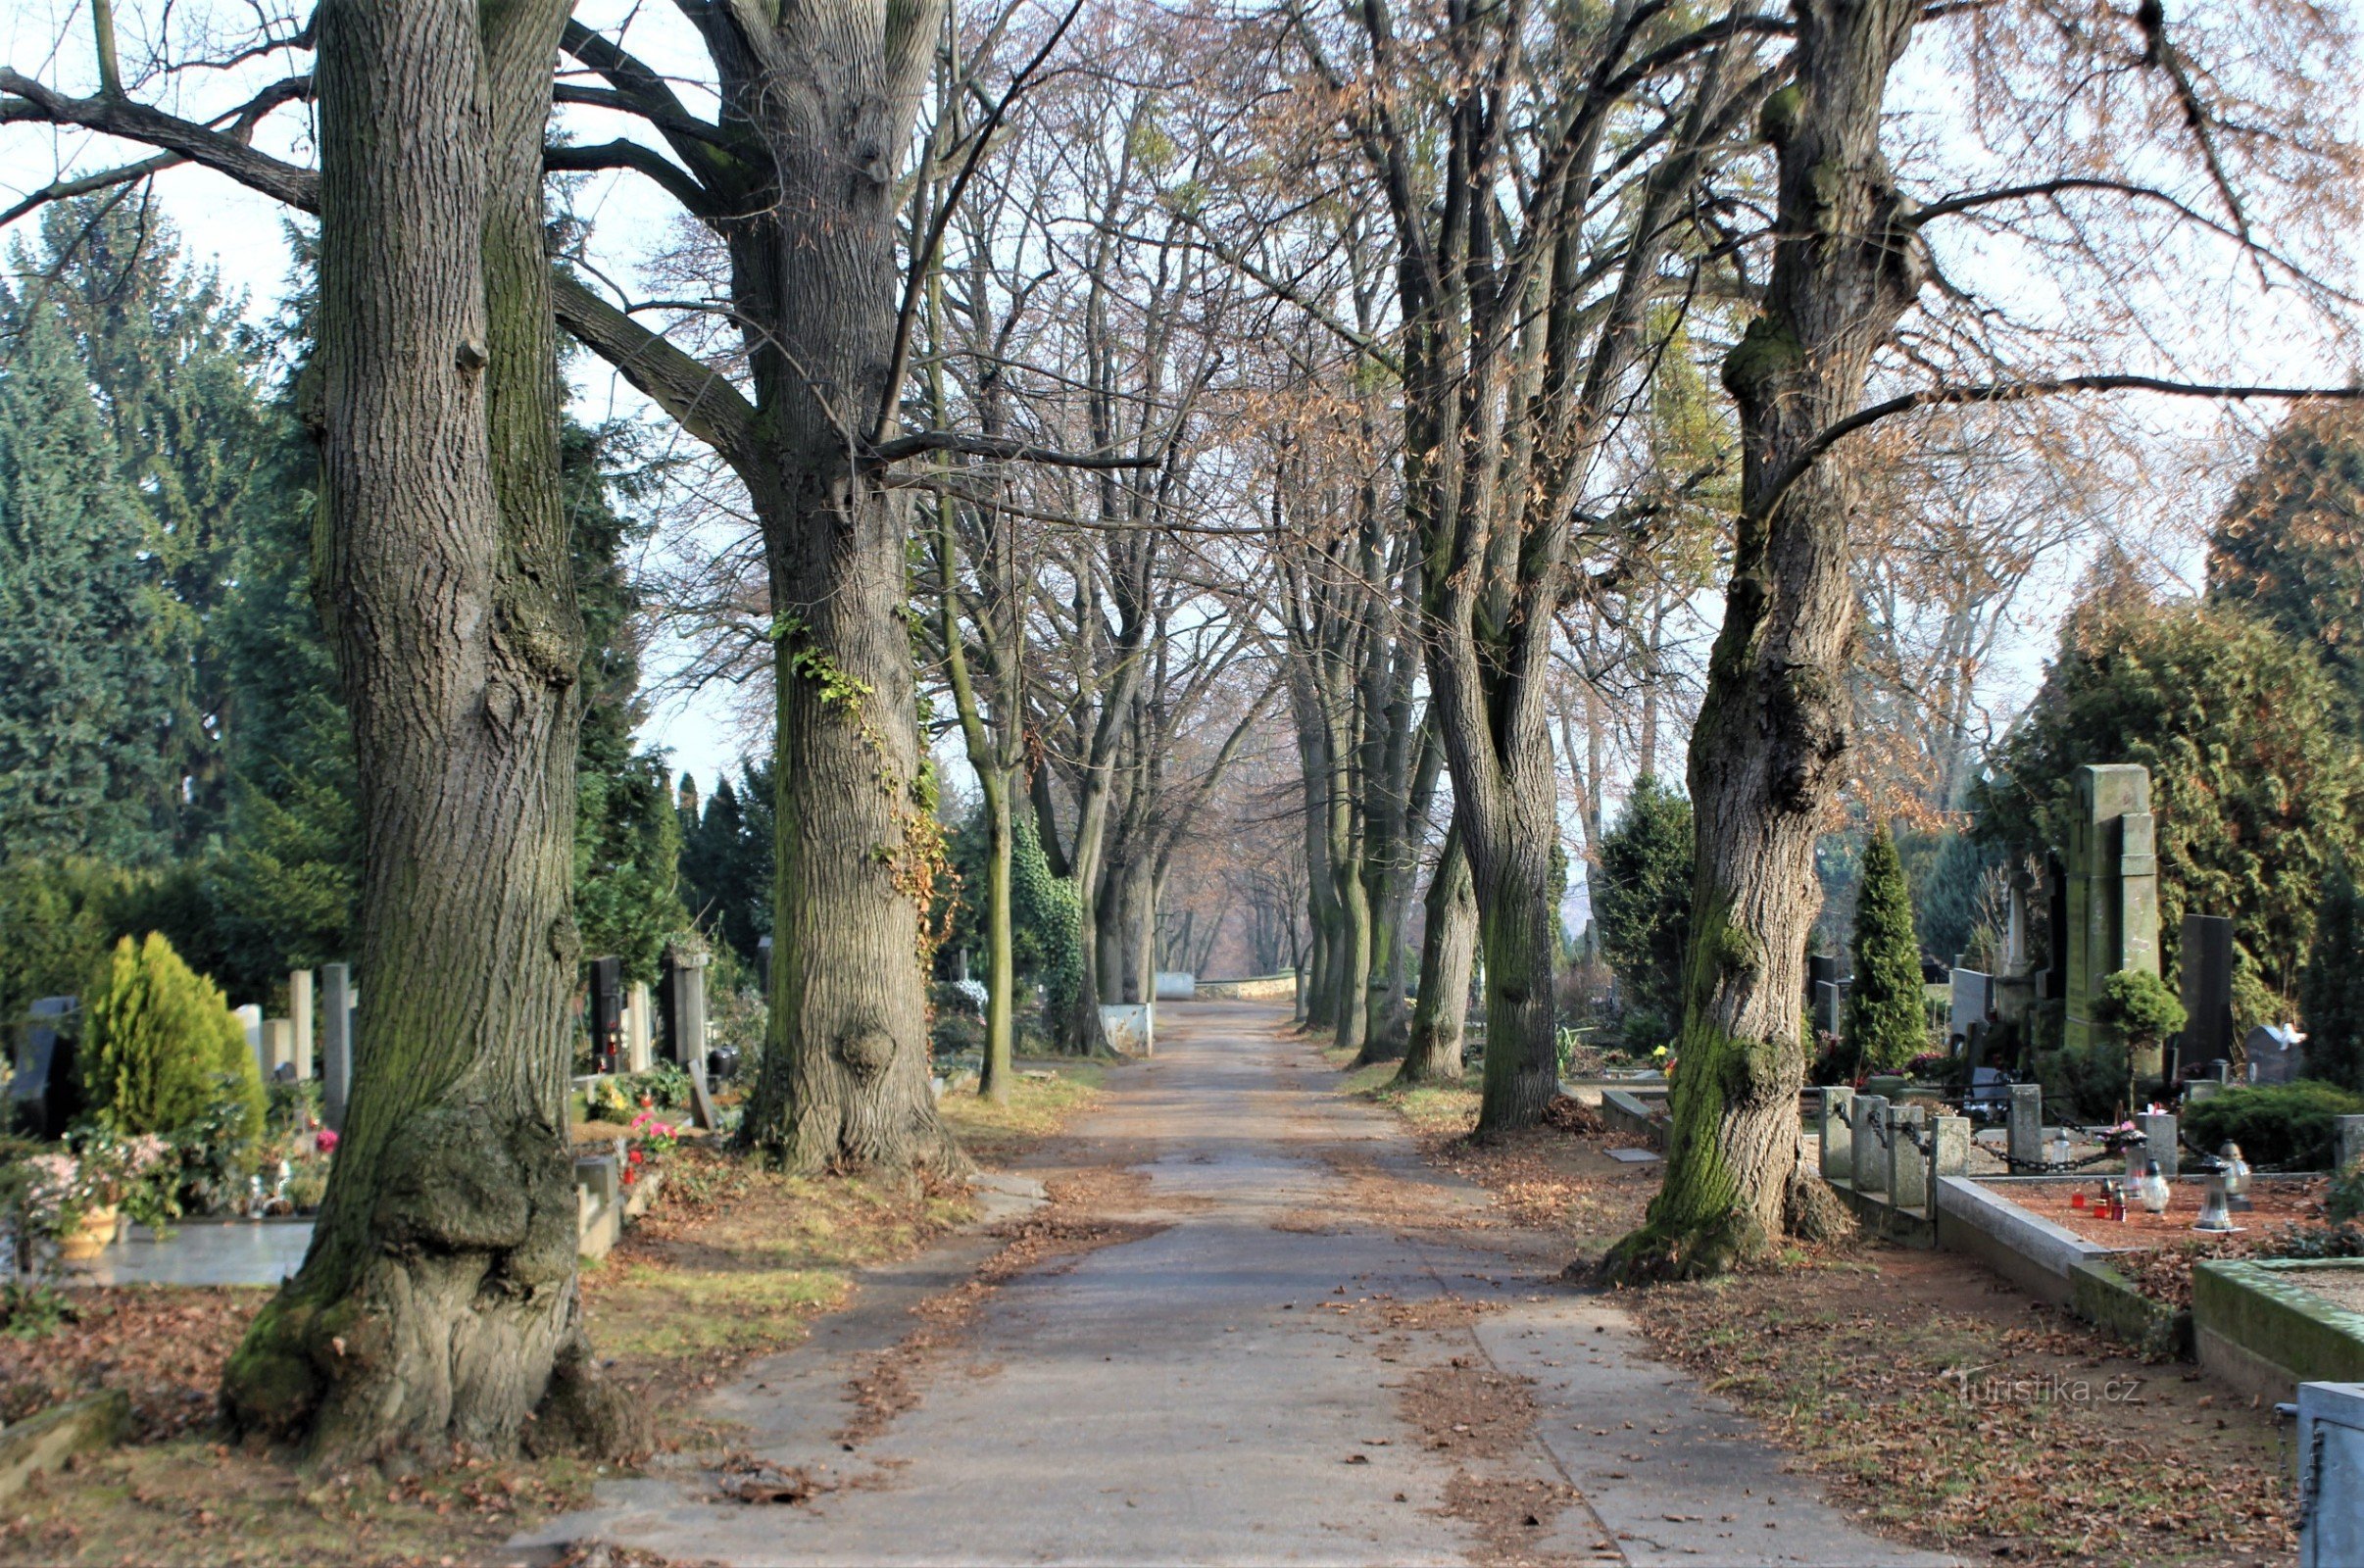 The cemetery is interwoven with a network of avenues with mature greenery